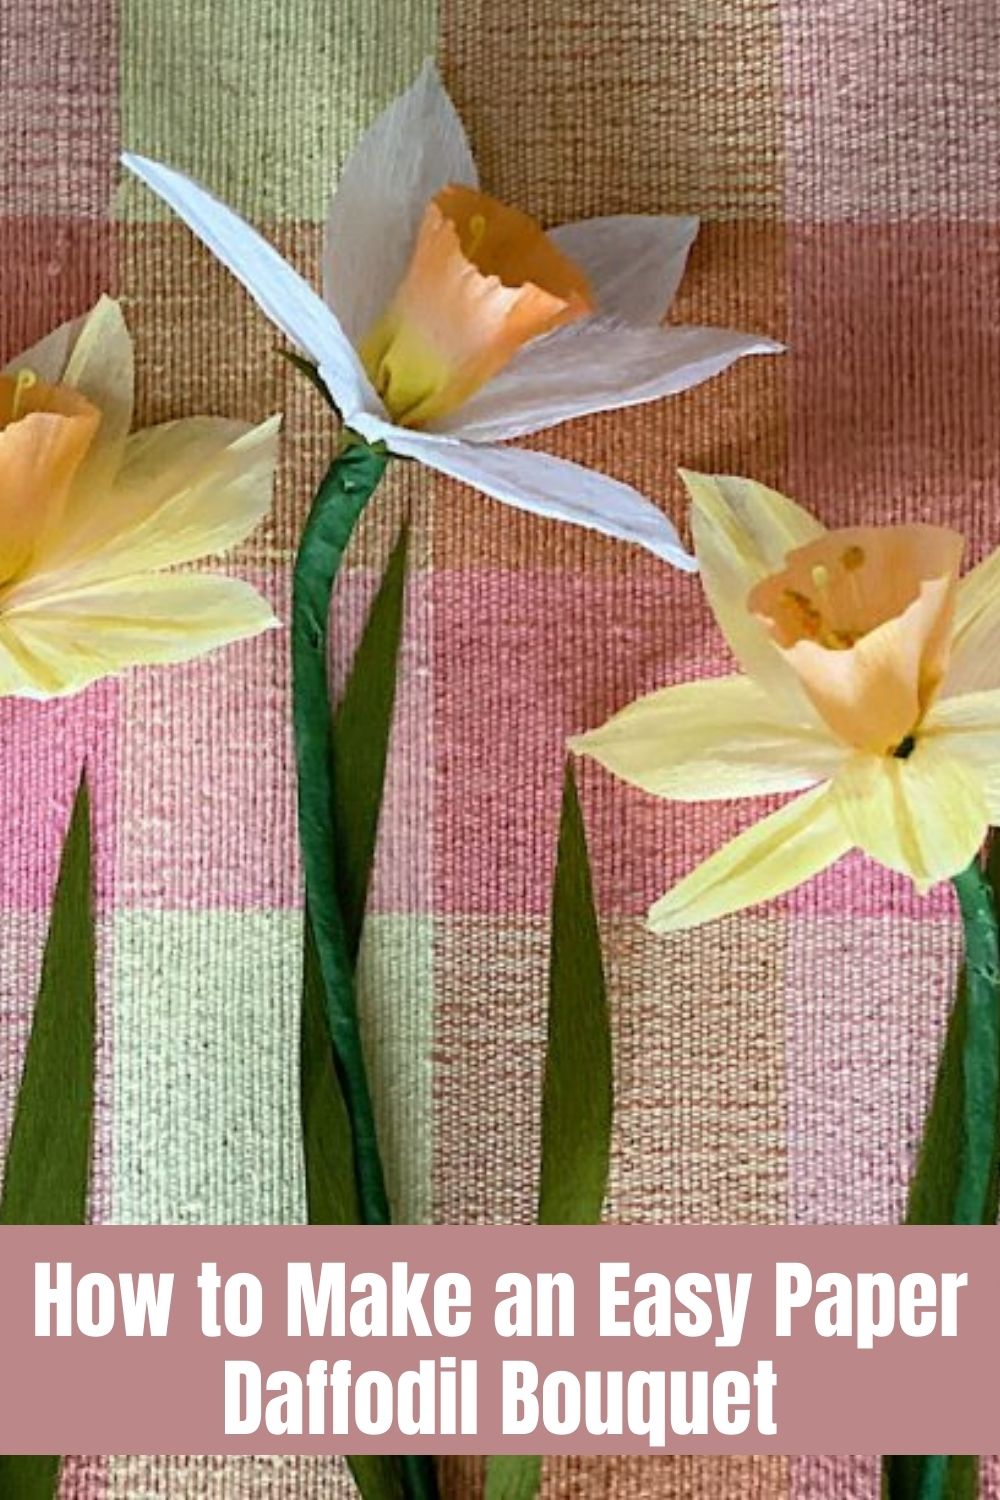 One of my favorite crafts to make is paper flowers. In the last year, I have made peonies, roses, carnations, hydrangeas, gerbera daisies, and poppies. Today I made daffodils.